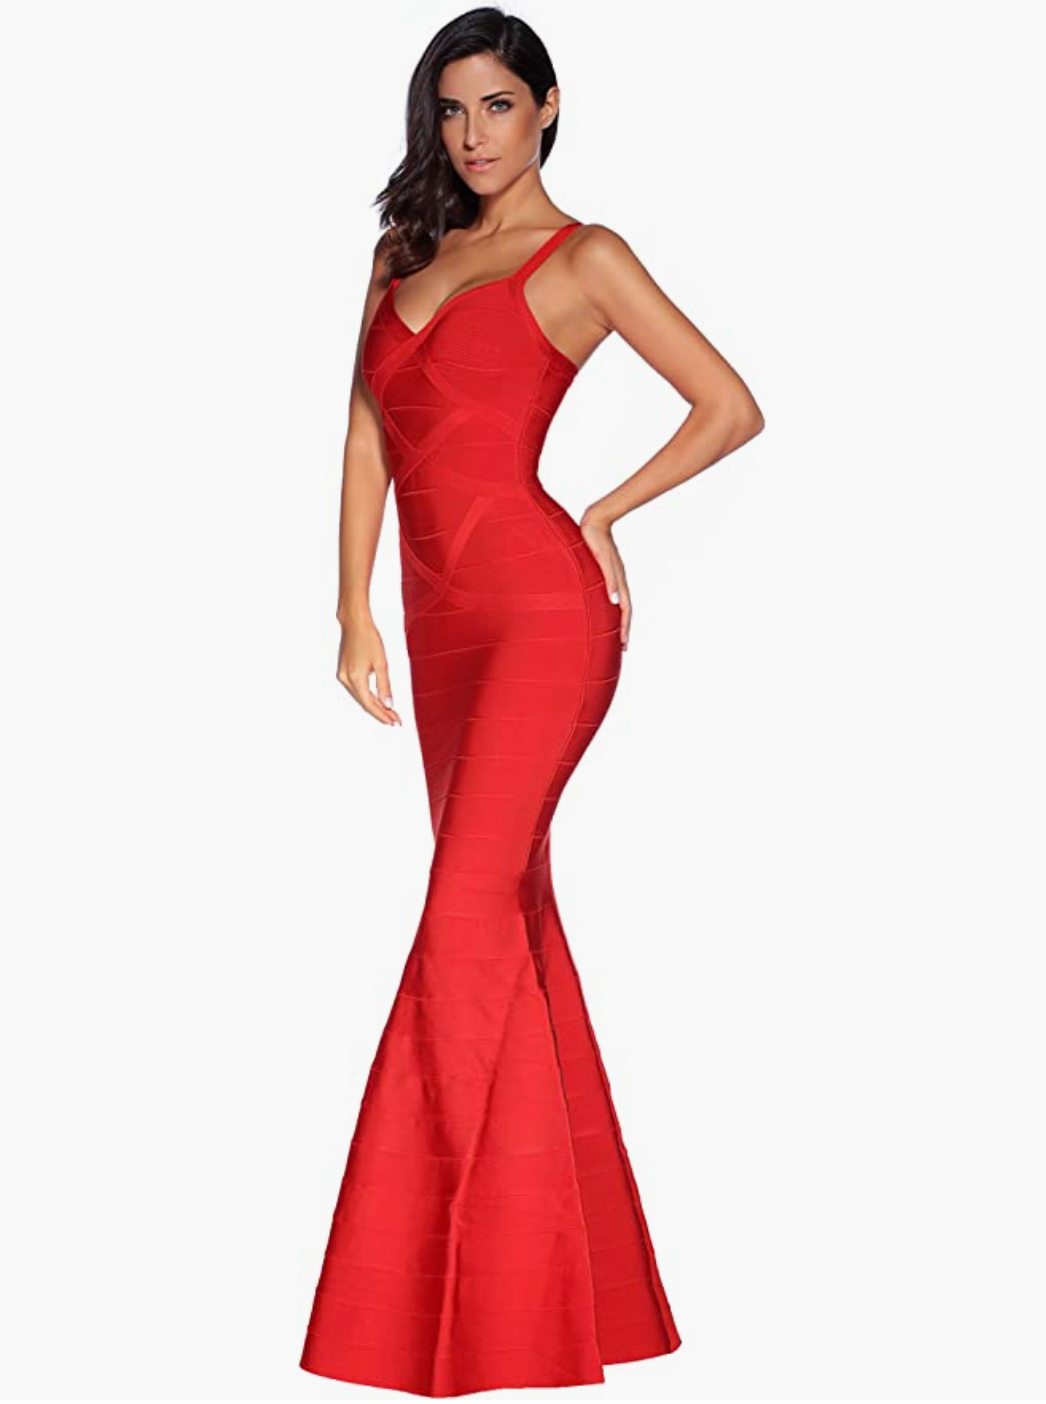 Red Maxi Bandage Dress  Bodycon Formal Evening Dresse